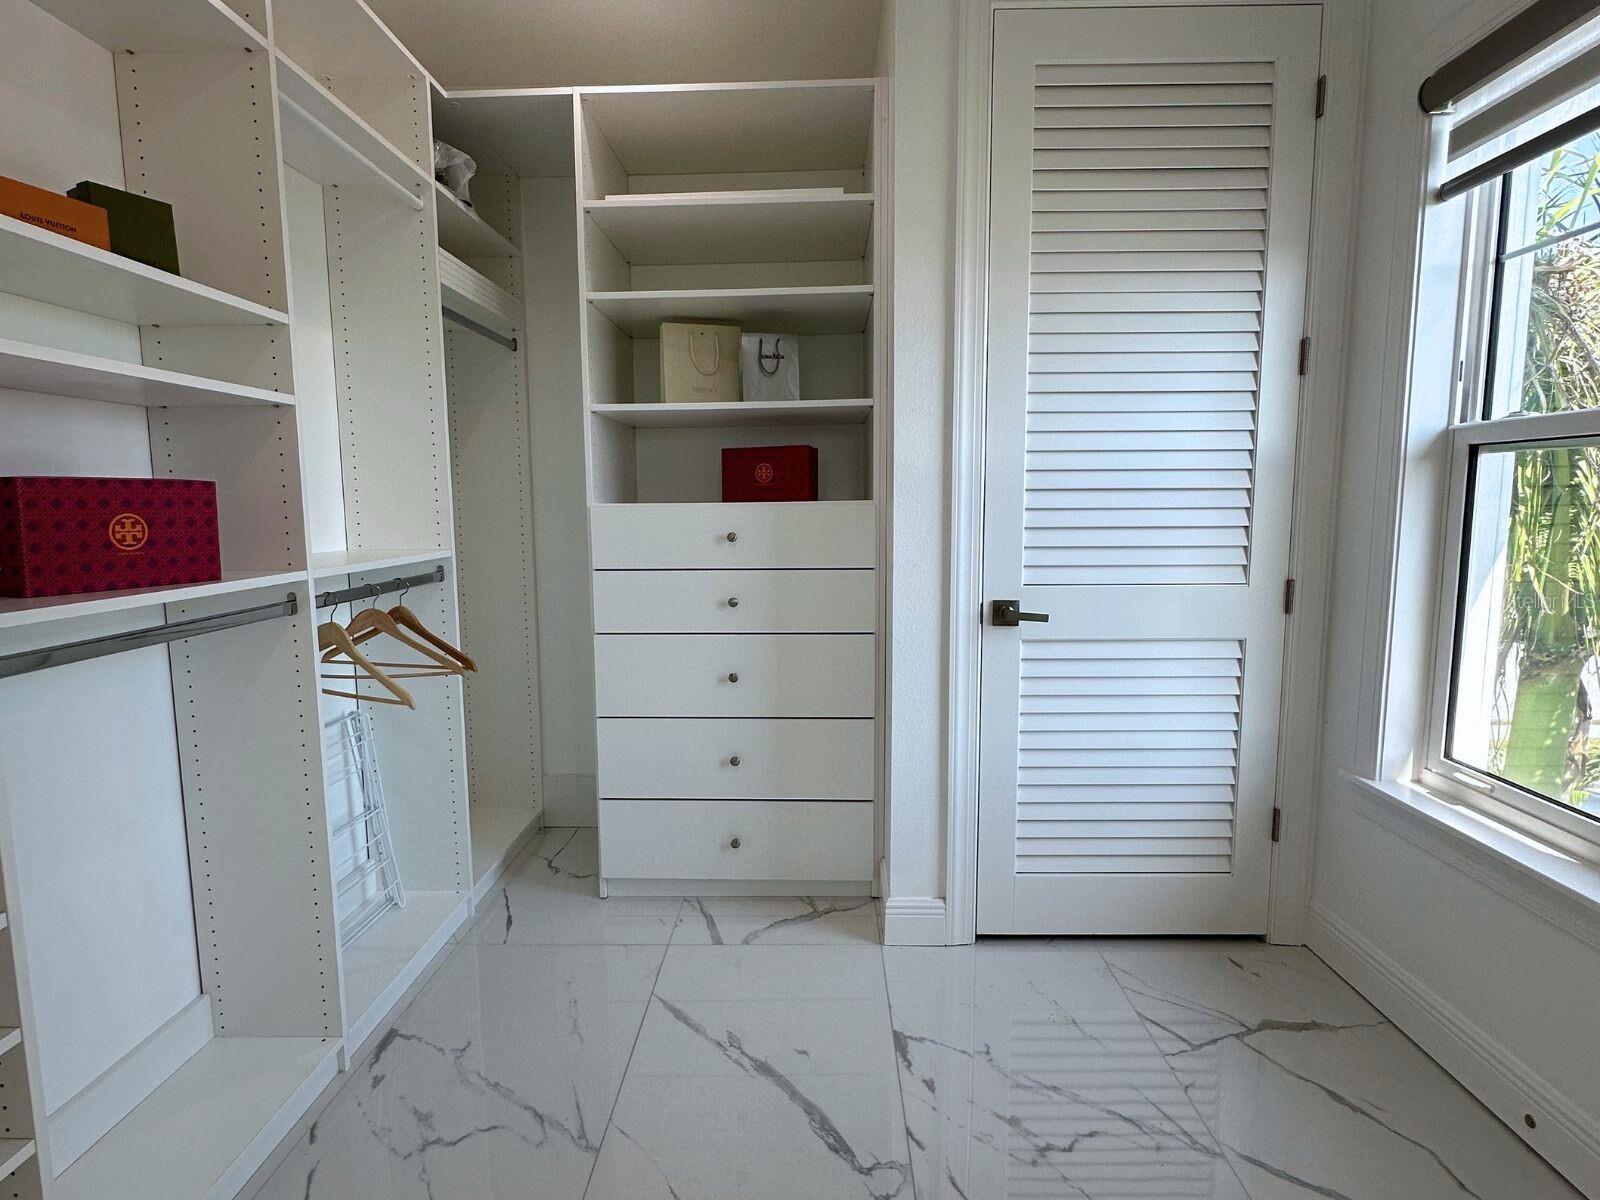 Enjoy the convenience and luxury of the massive walk-in closet in Master Suite 2, complete with custom built-ins, providing ample storage space and organization for your wardrobe essentials in your coastal retreat.